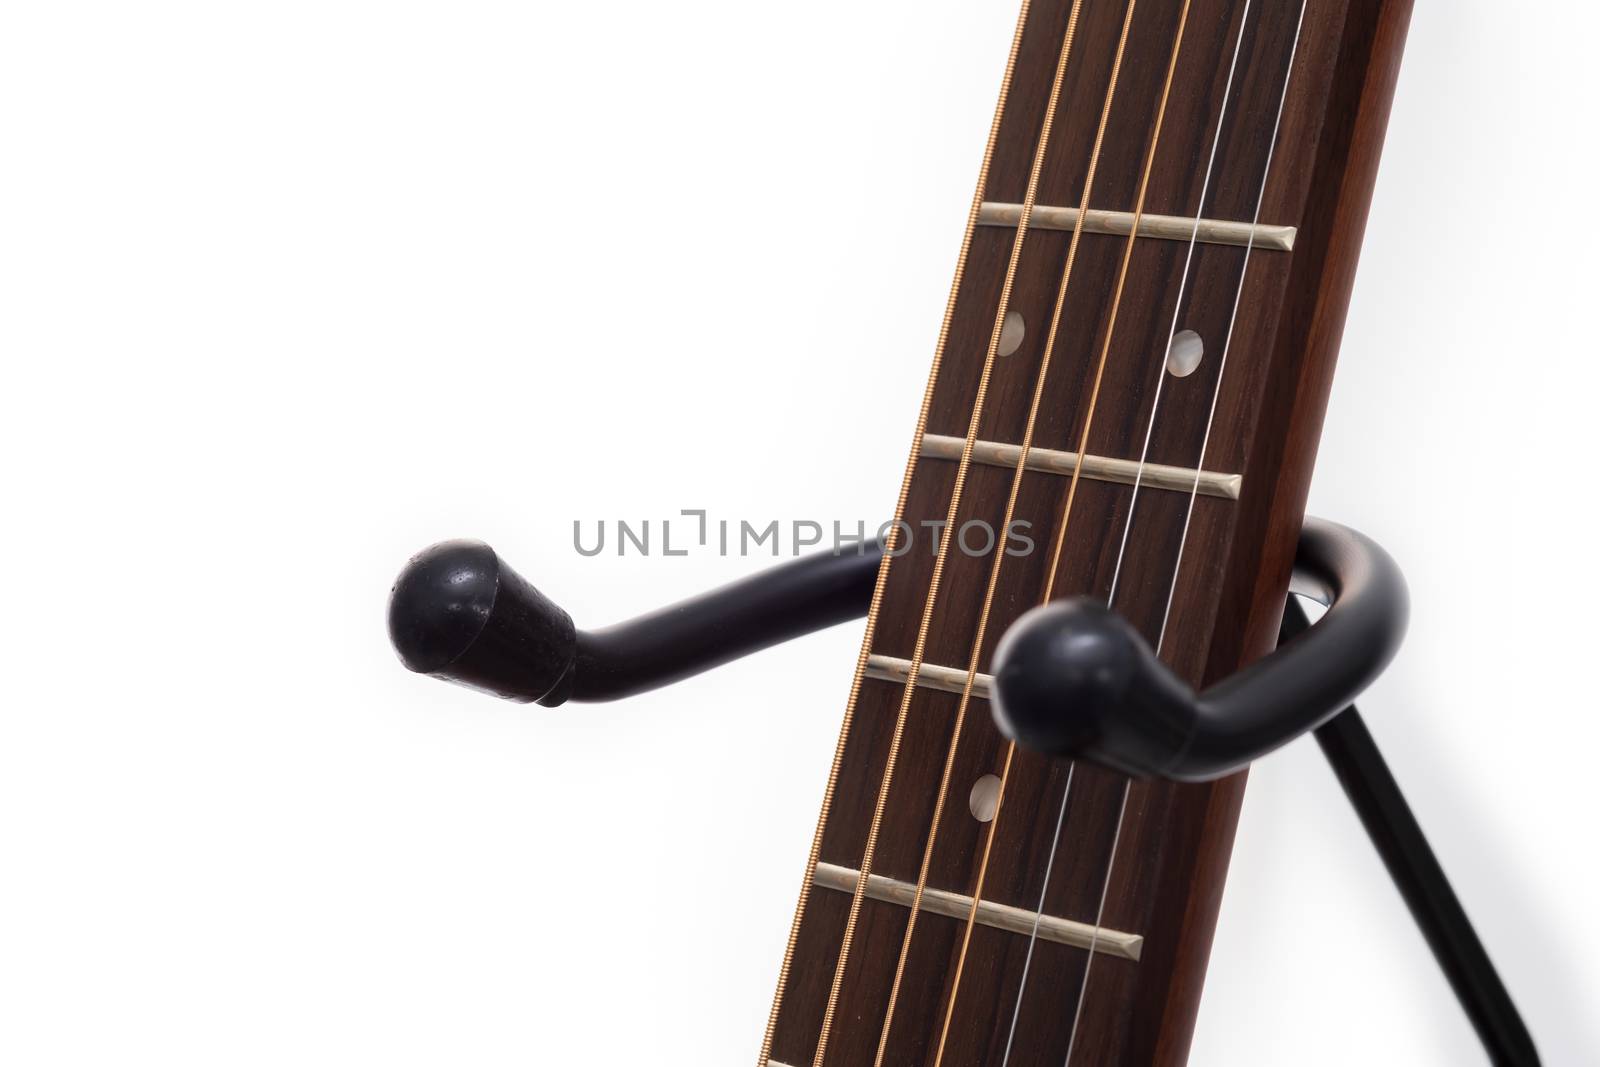 Guitar is a classic instrument on stand.